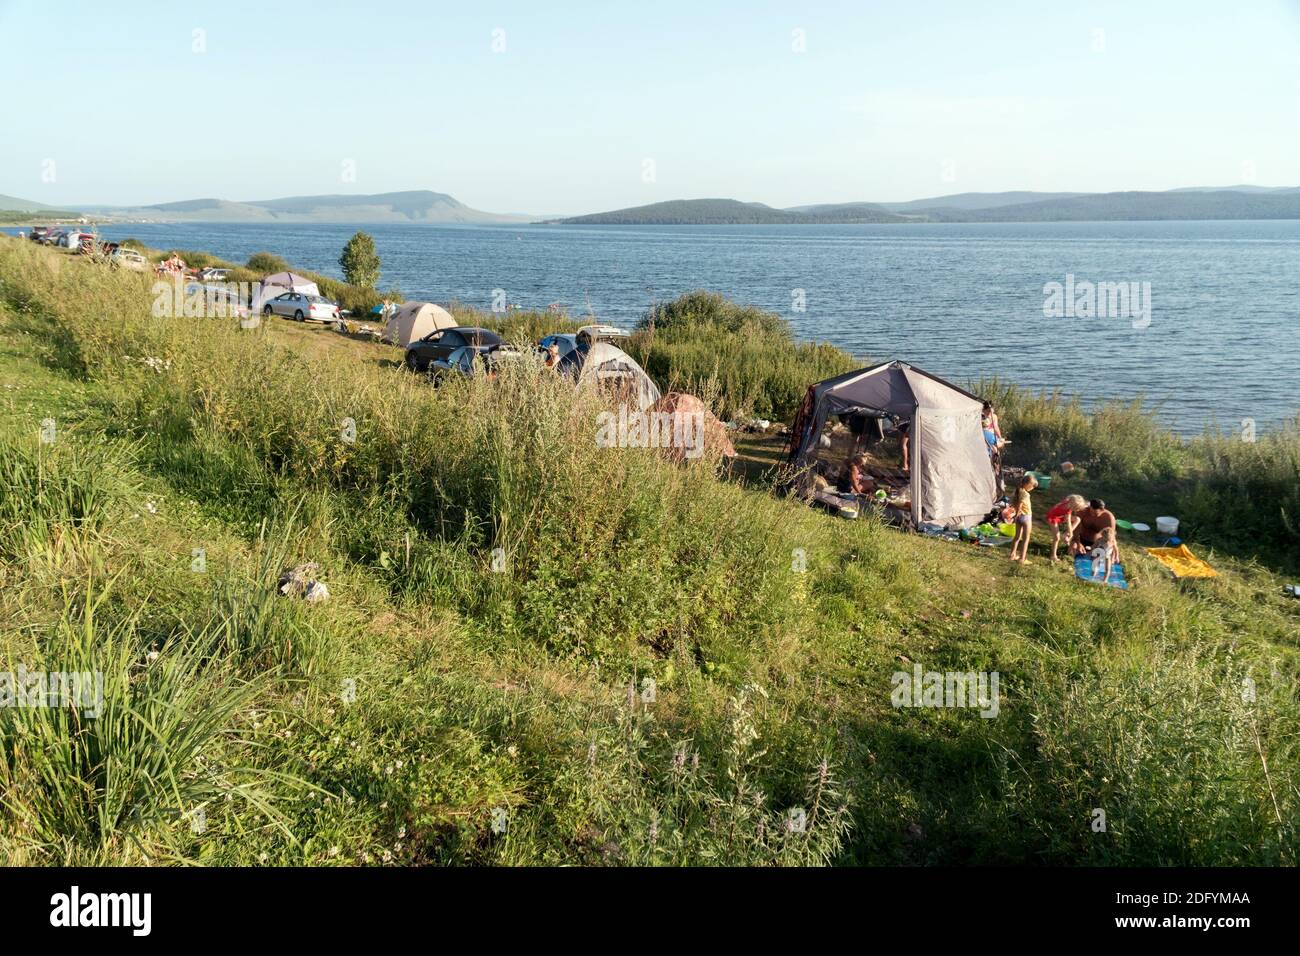 Tents with people resting on the shores of the Big Lake during their vacation on a sunny summer day. Stock Photo